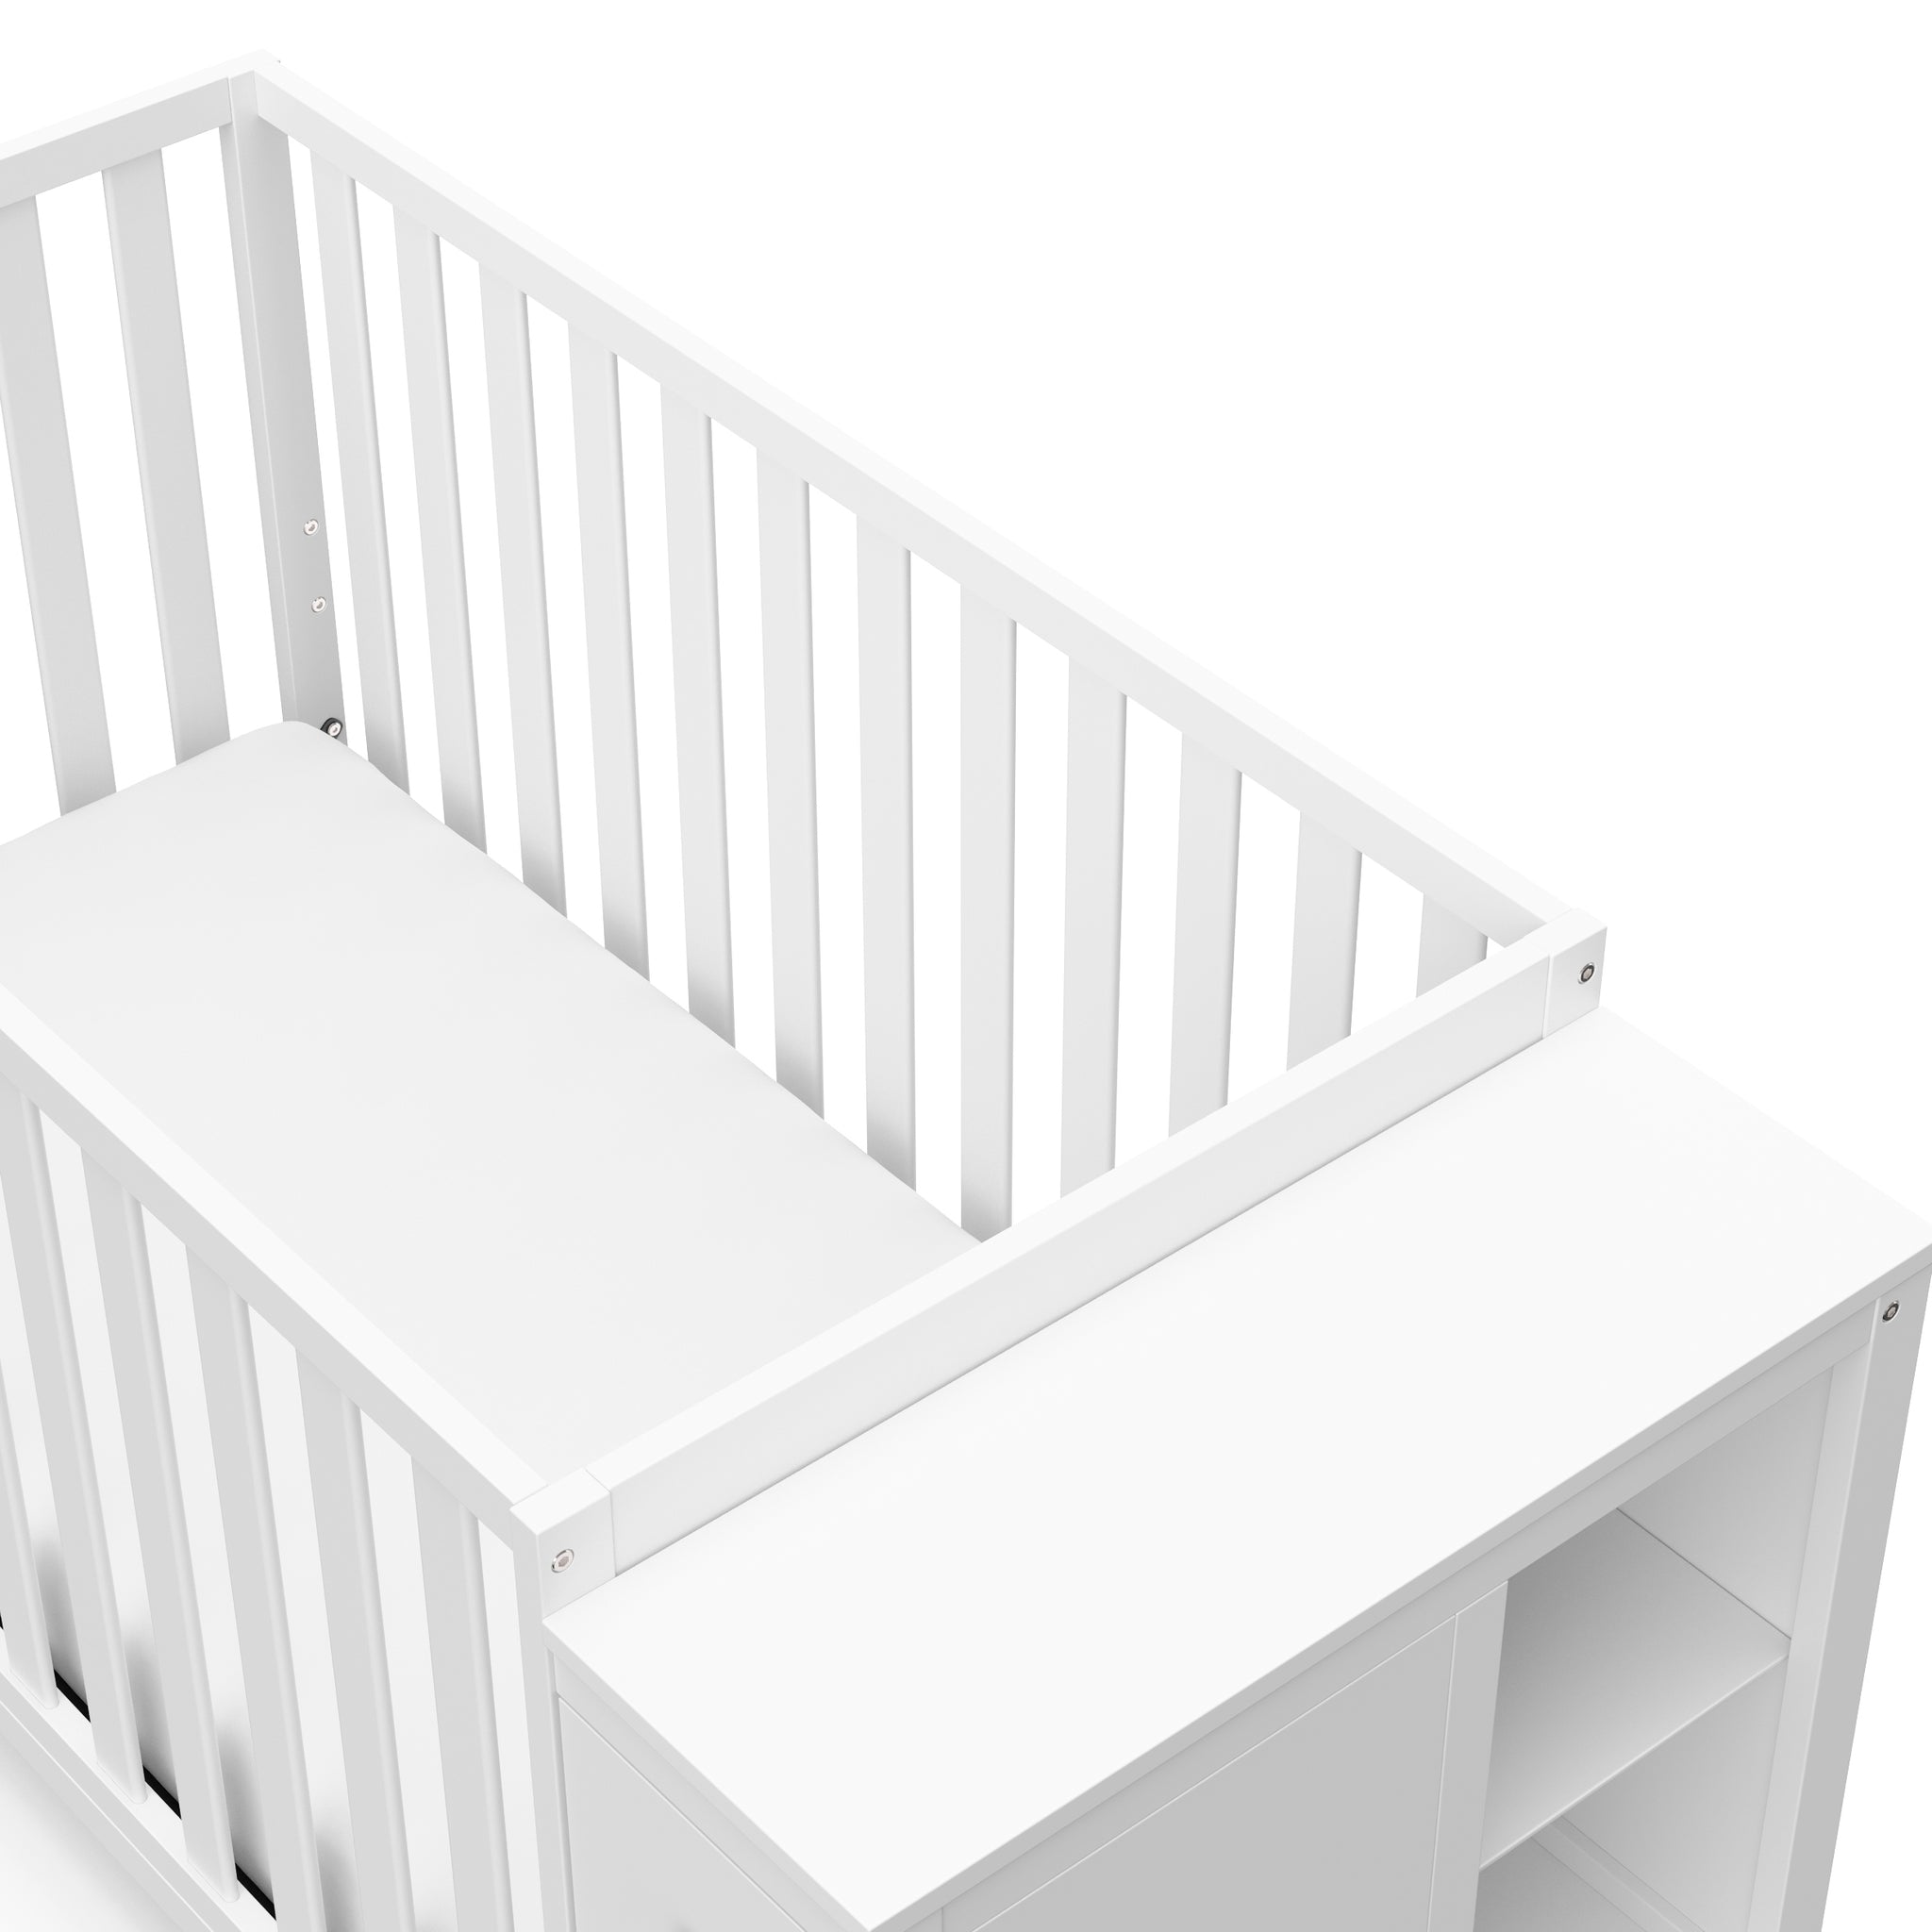 Close-up view of white crib with storage headboard